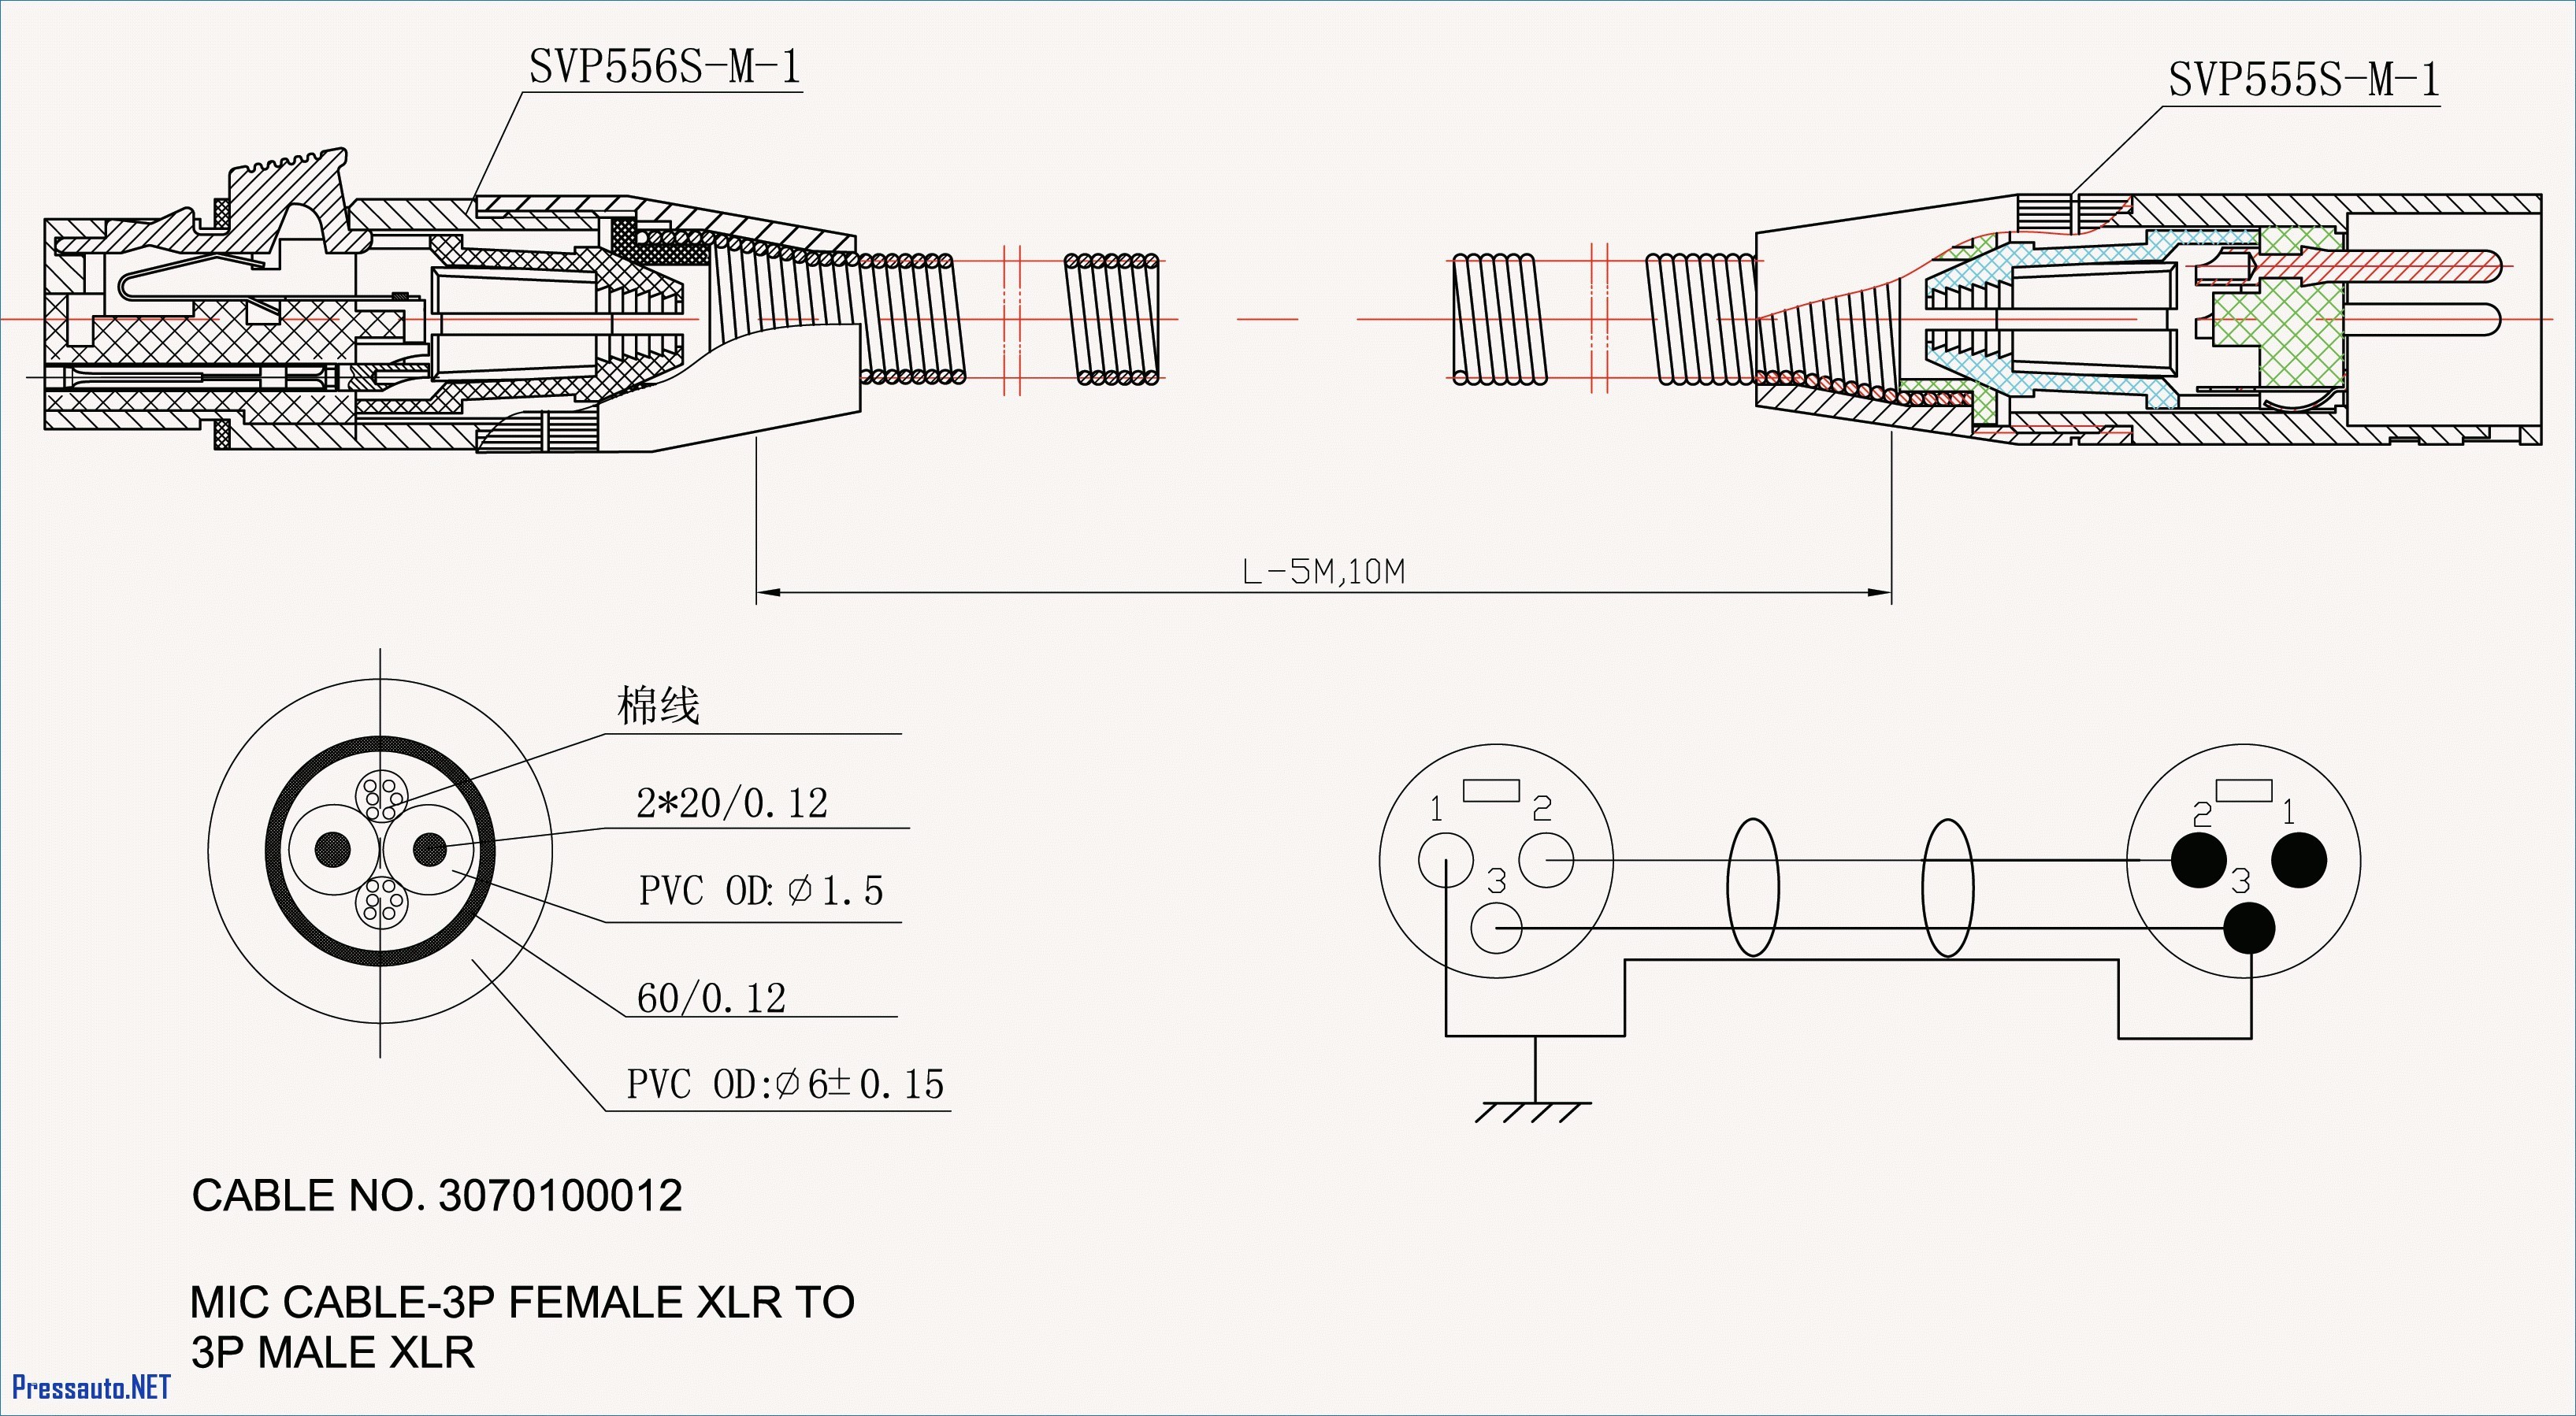 Cable Wire Diagram Awesome Cat6 Wire Diagram New Pretty Xlr Cable Wiring Diagram Gallery